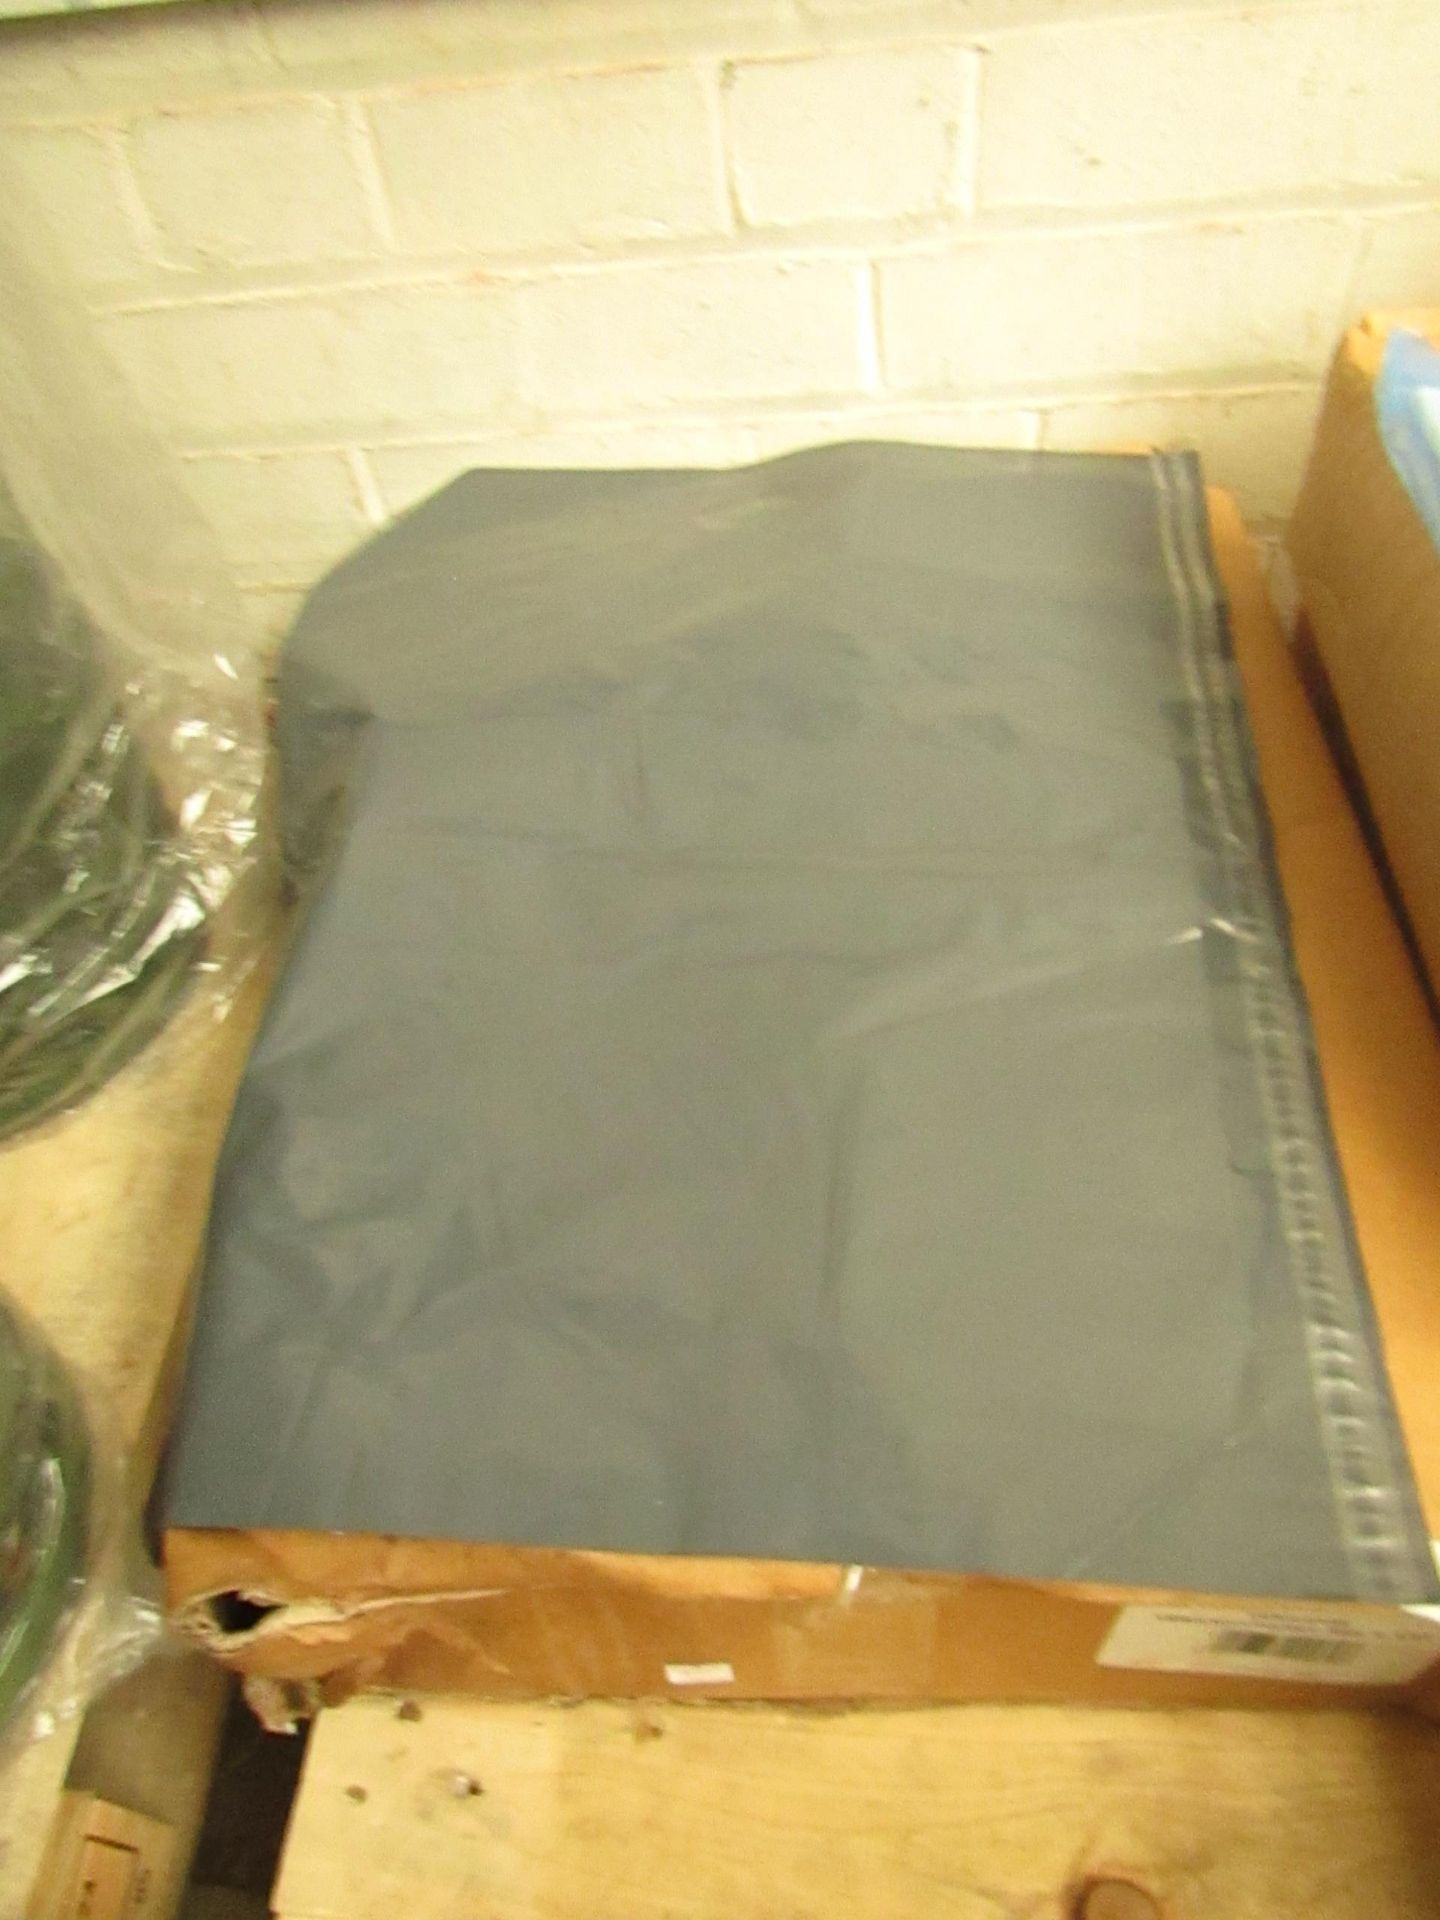 Versapak - Economy Large Grey Mailer Bags 595 x 430 (Box Containing Approx 500) - Unused & Boxed.